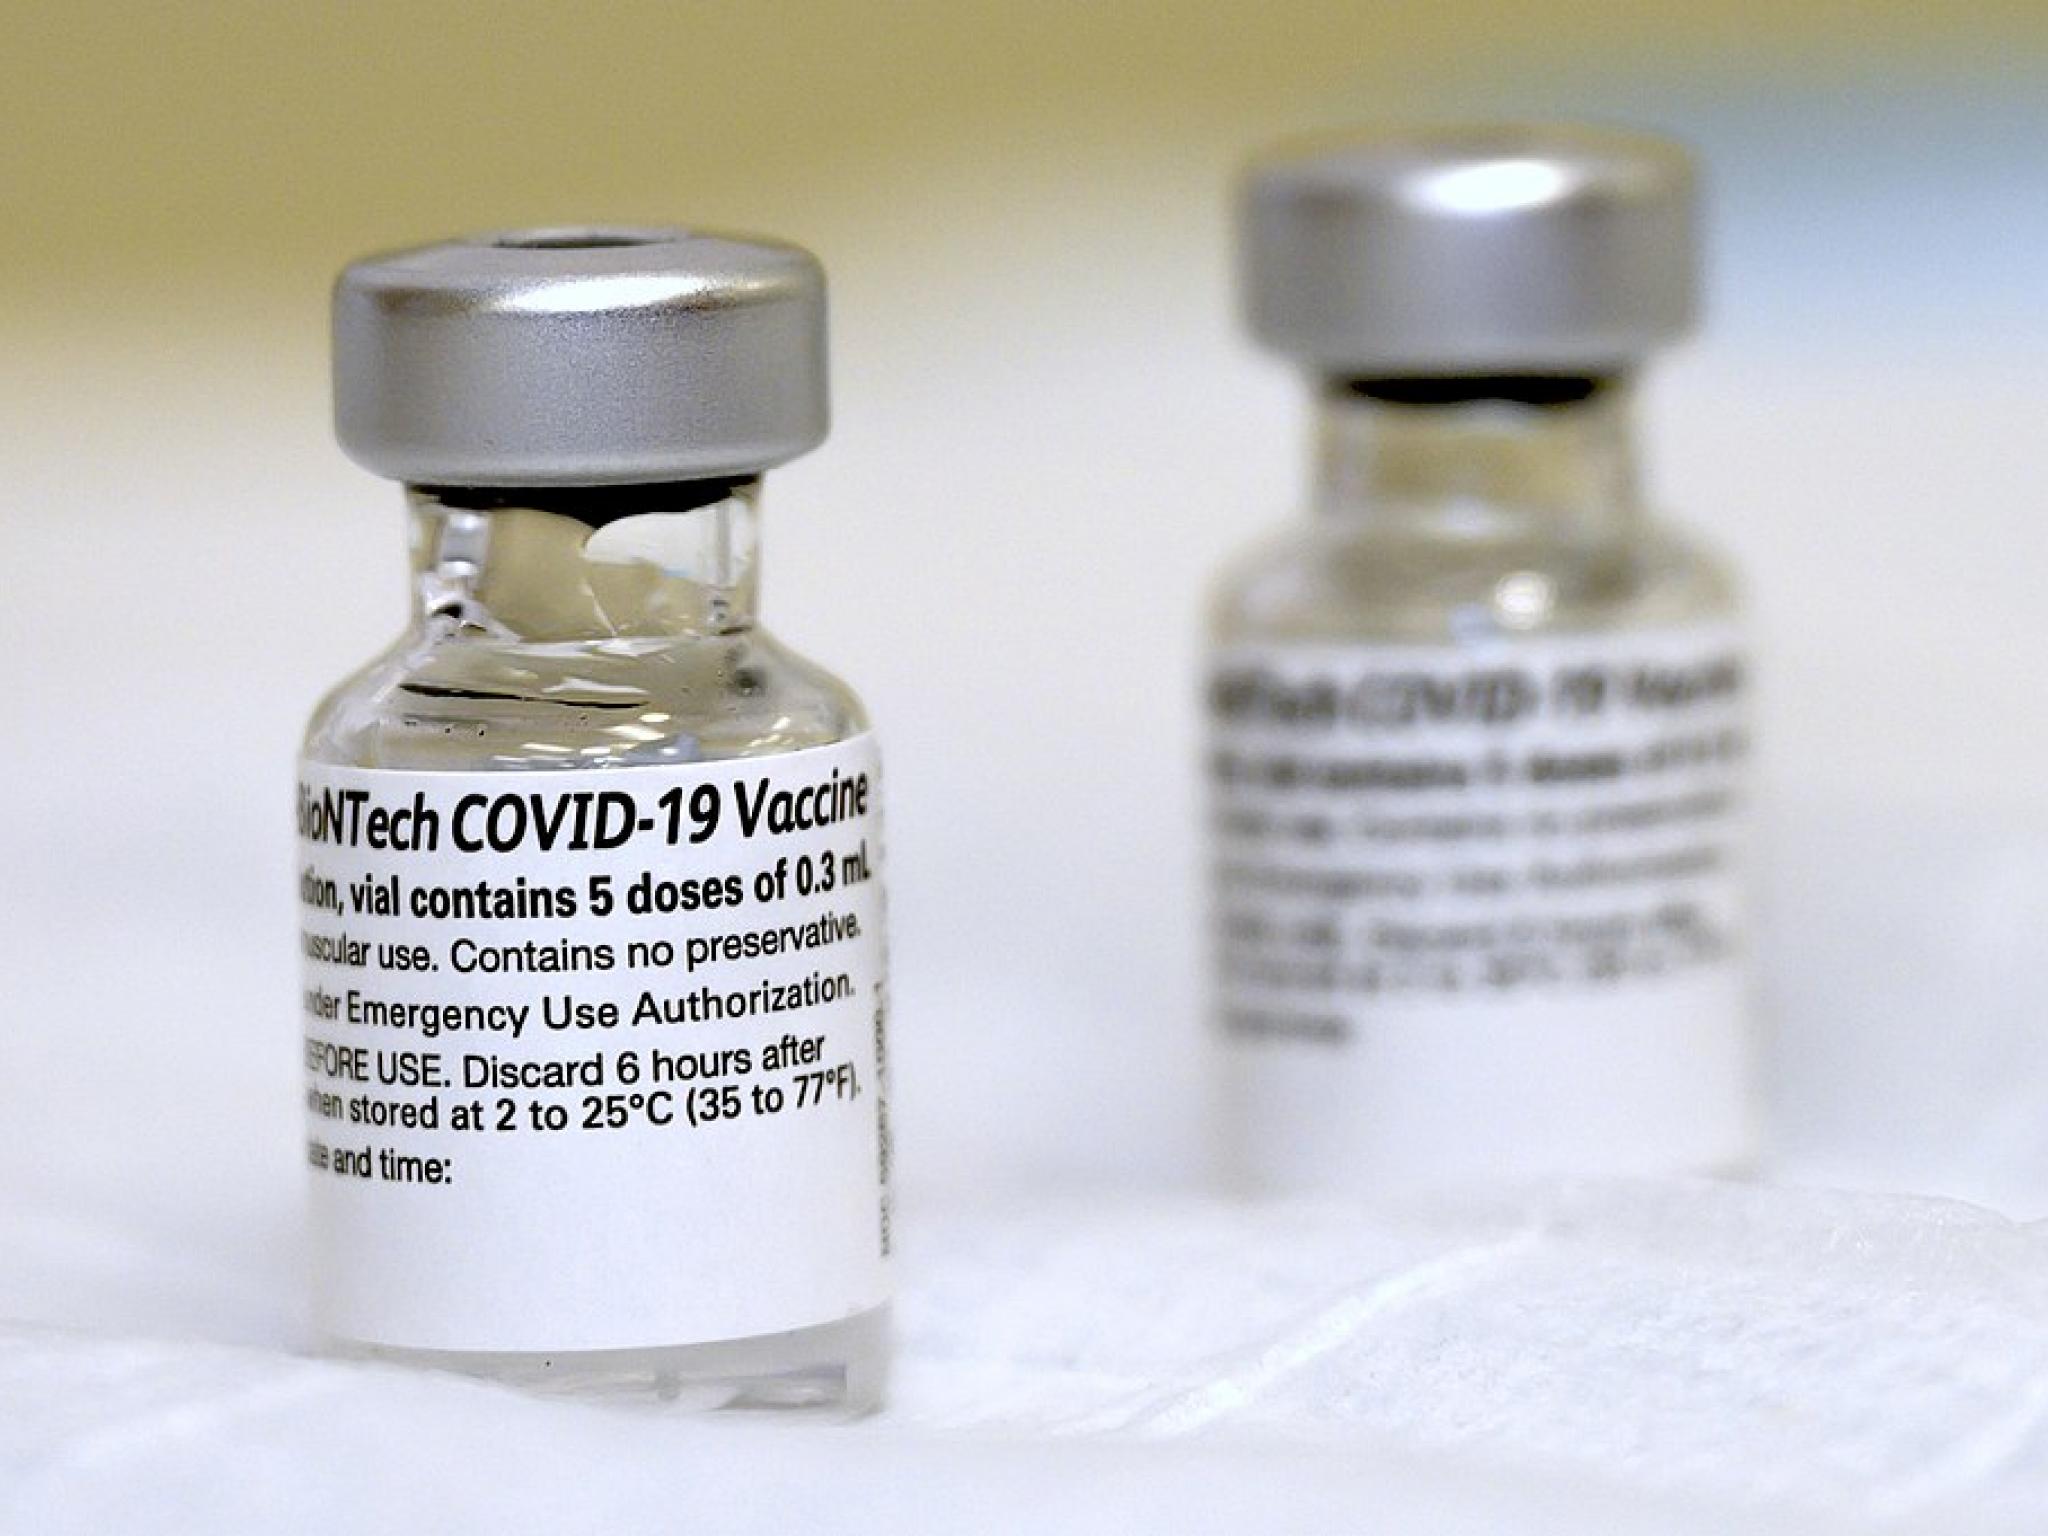  london-high-court-ruling-fuels-pfizer-and-moderna-legal-dispute-over-covid-19-vaccine-patents 